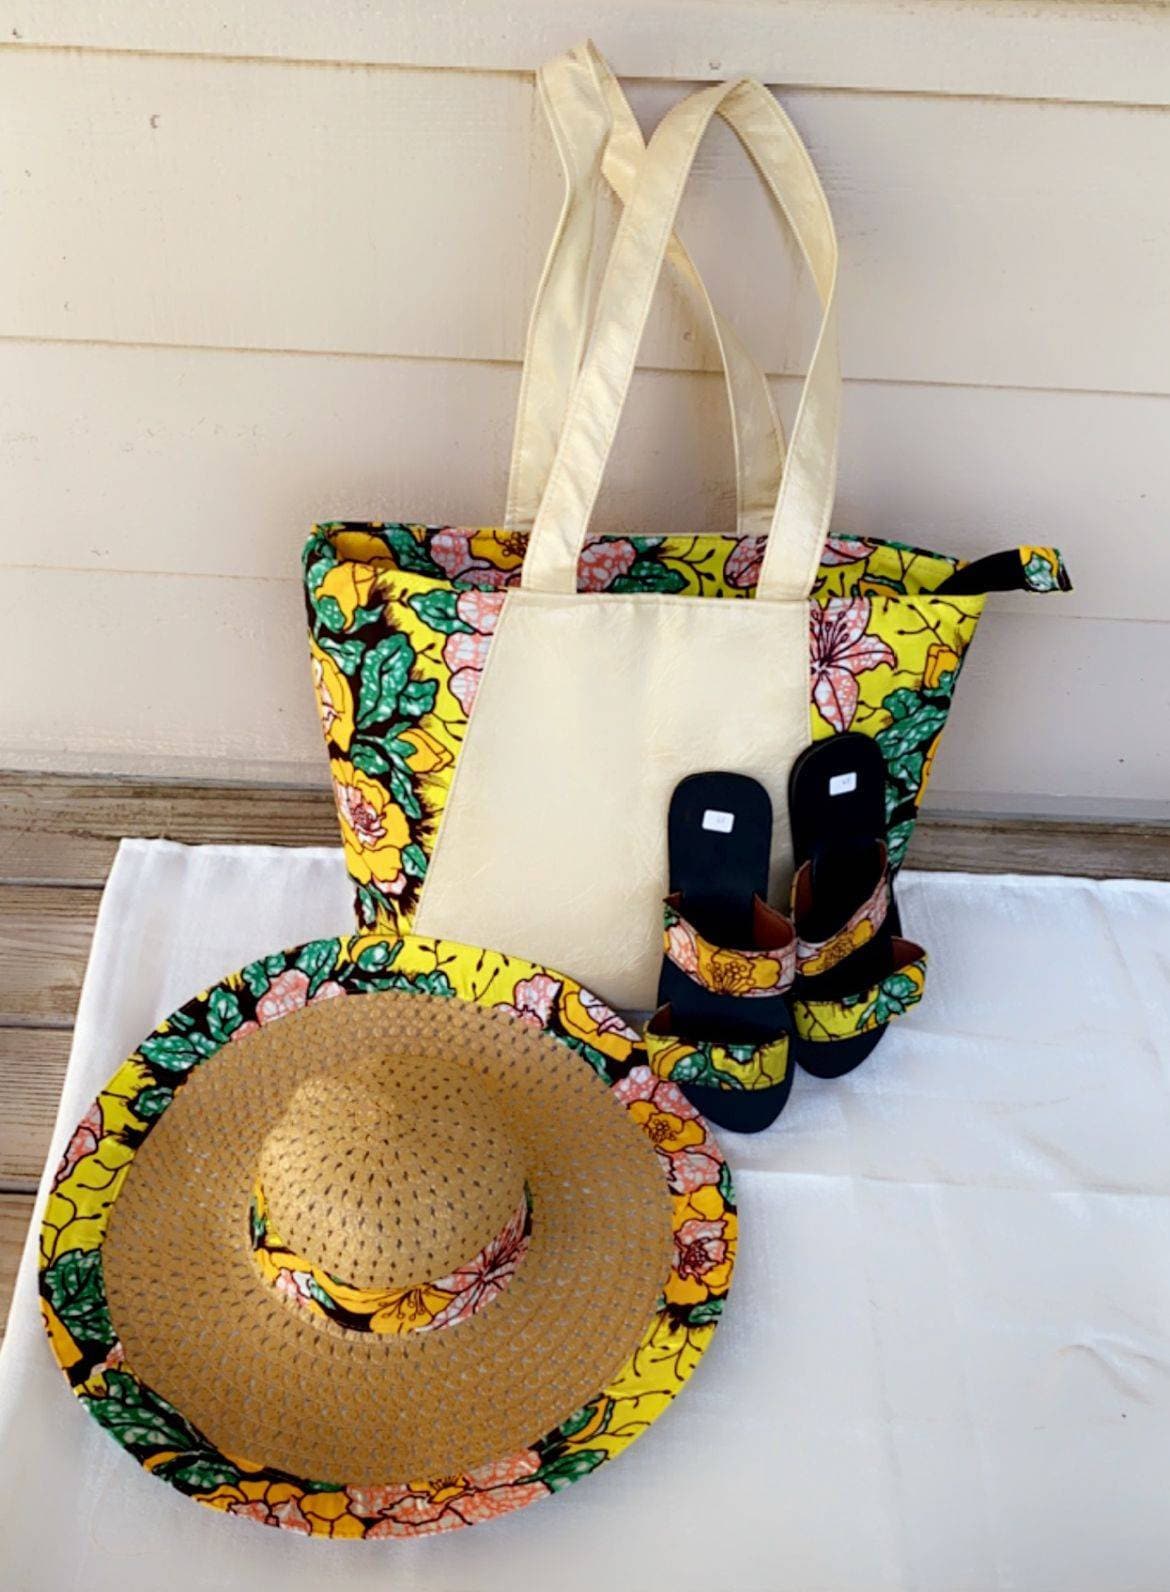 Summer Accessories  Straw Hats, Bags, Jewelry, Sandals